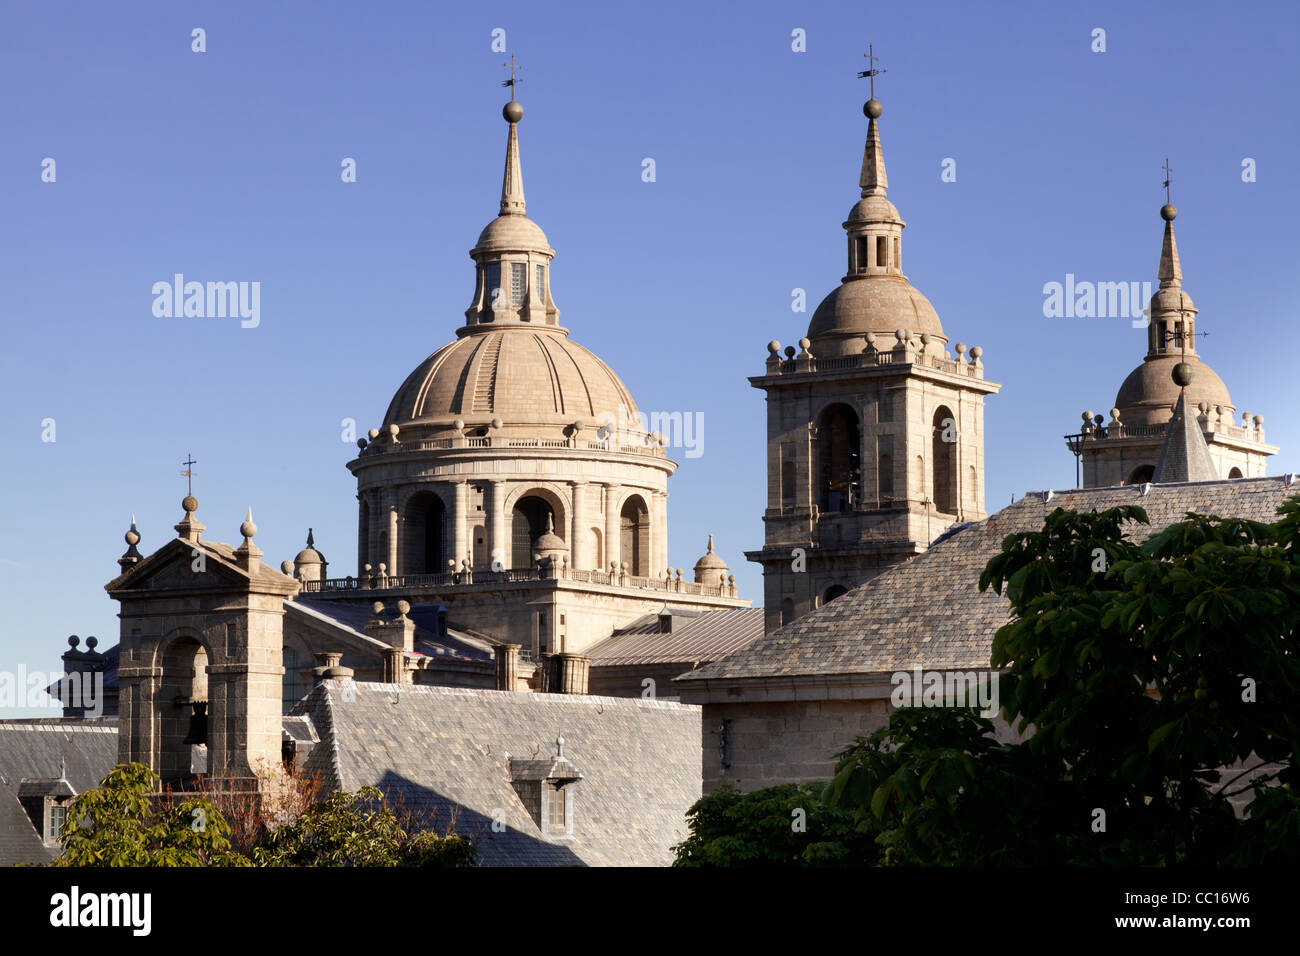 San Lorenzo de El Escorial Monastery - towers of the church and monastery are set of by a bright blue sky. Stock Photo